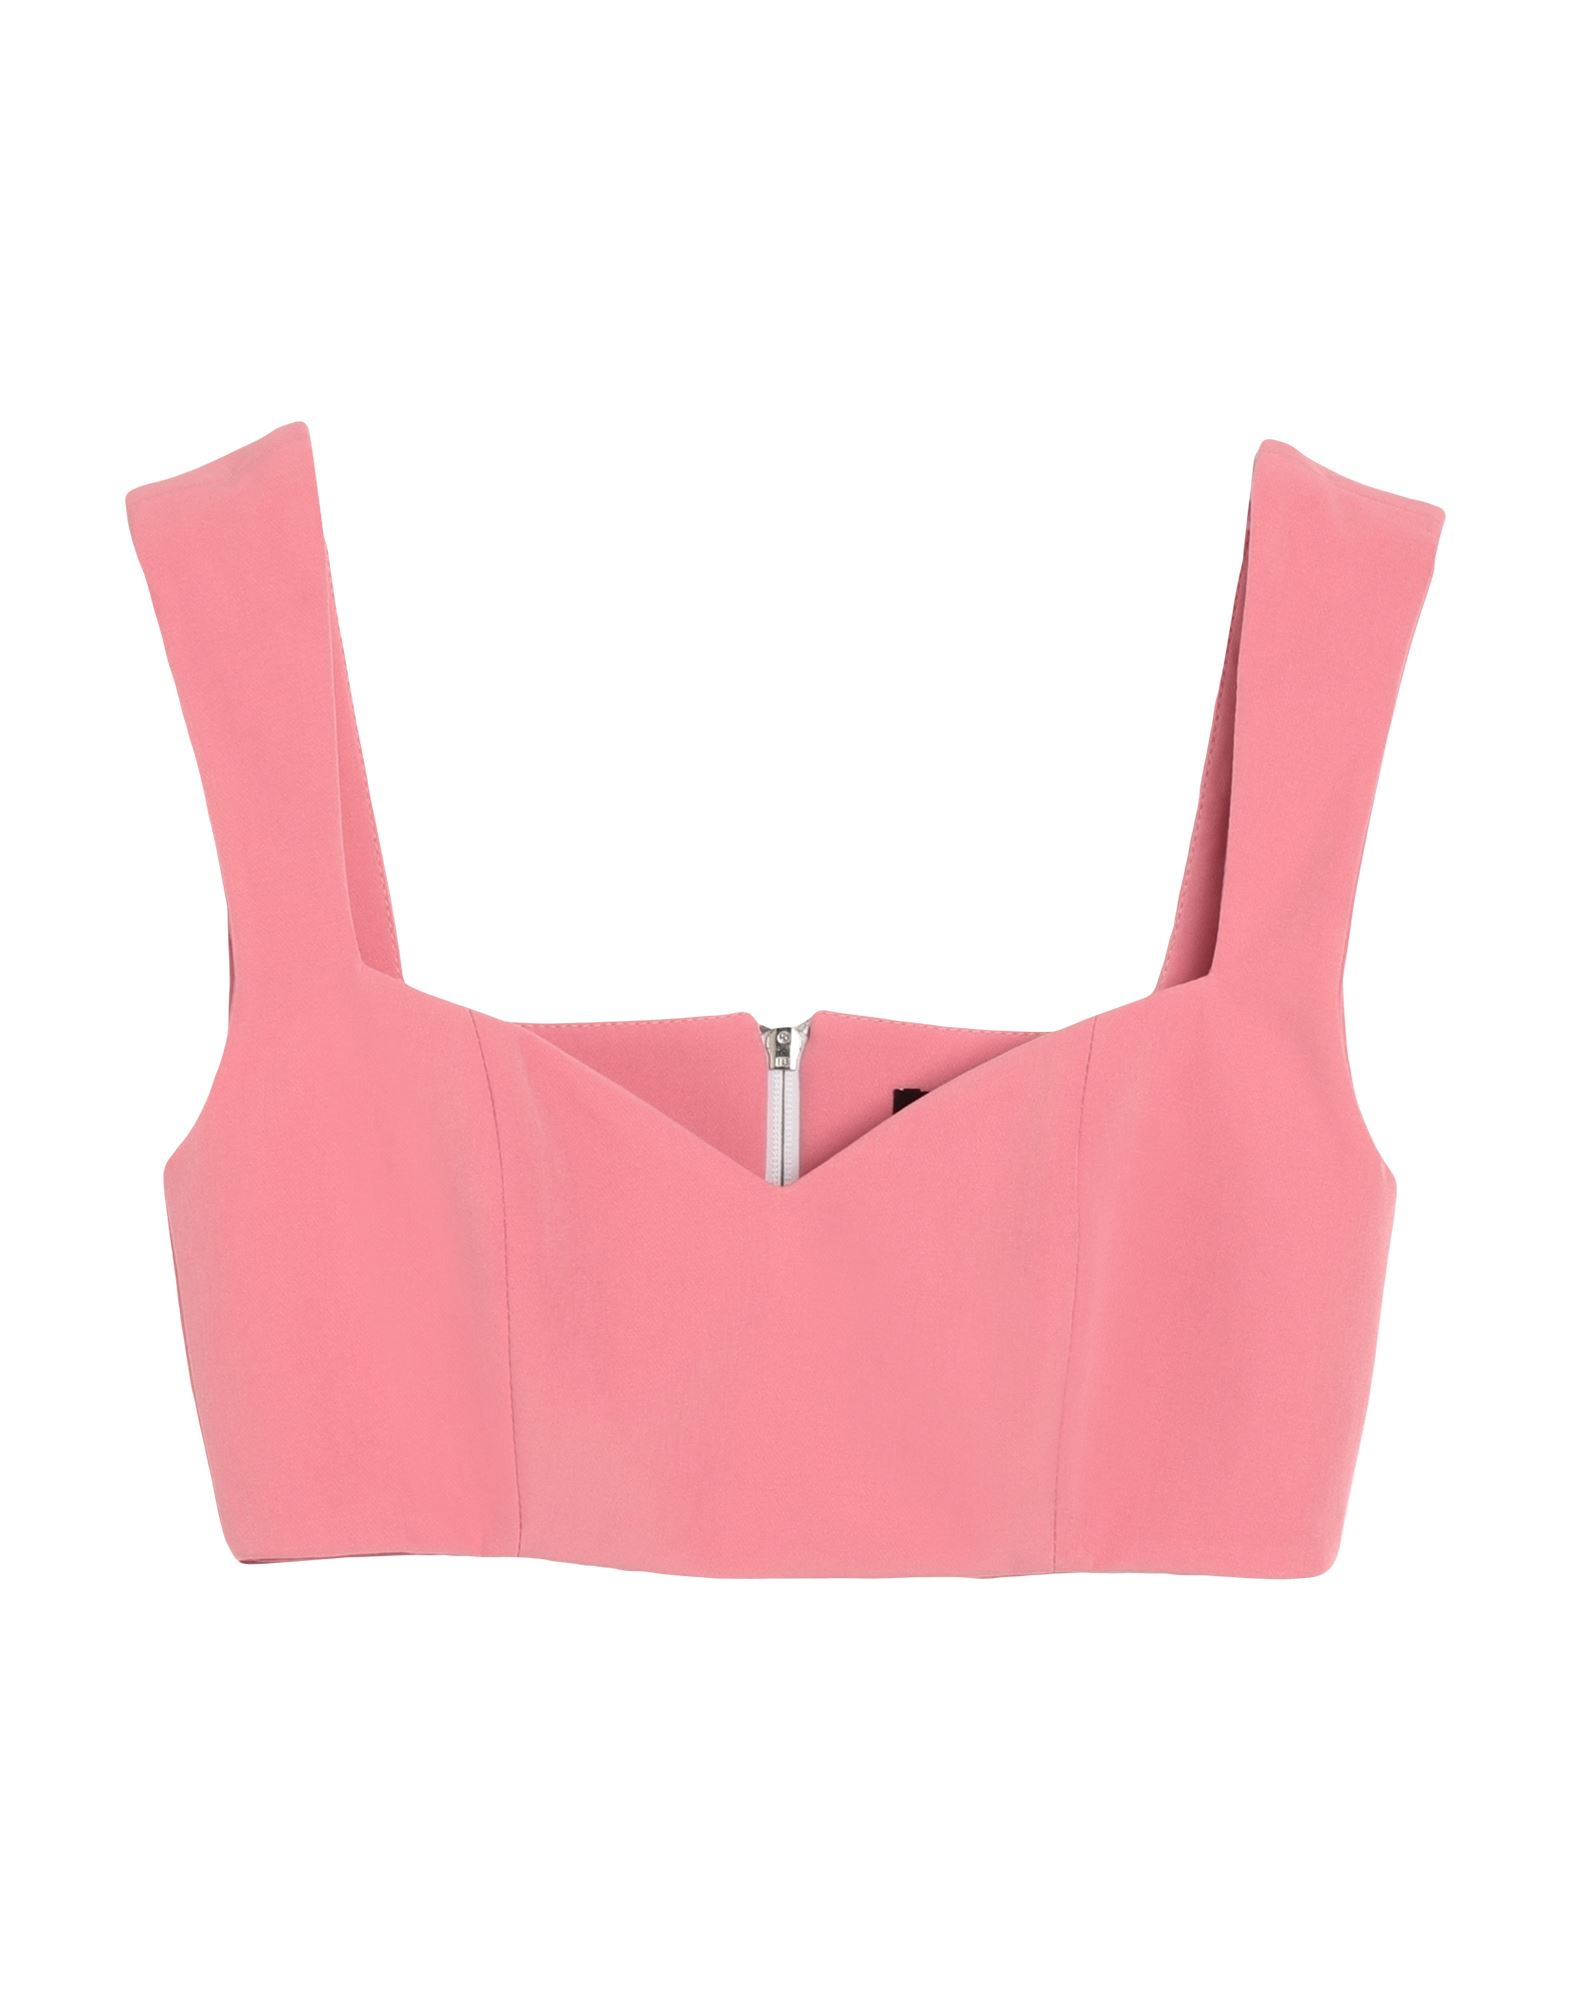 Actualee Tops In Pink